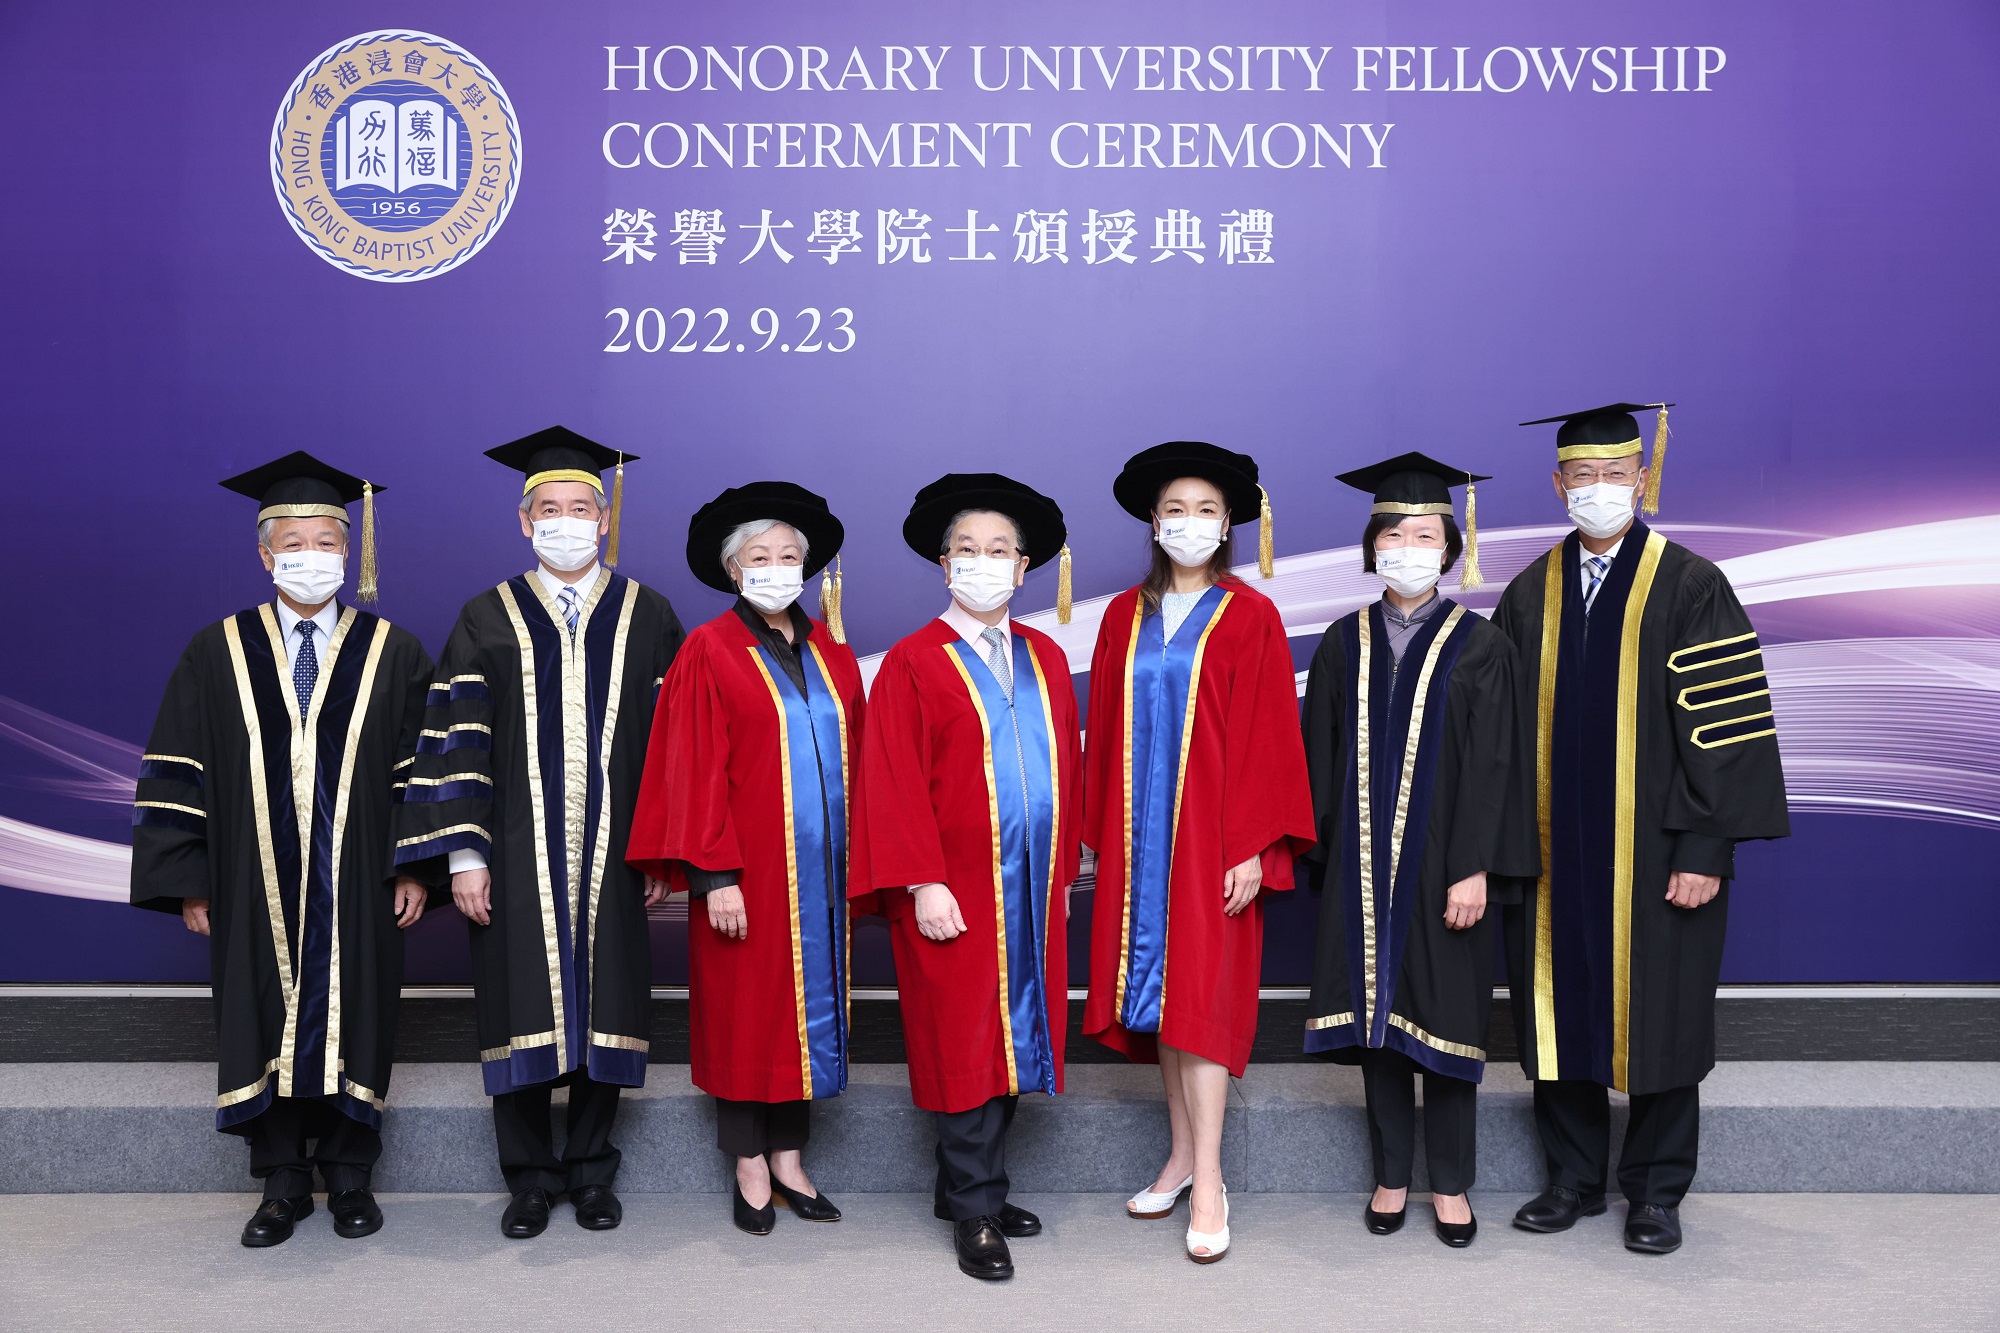 Honorary University Fellowships conferred upon distinguished persons